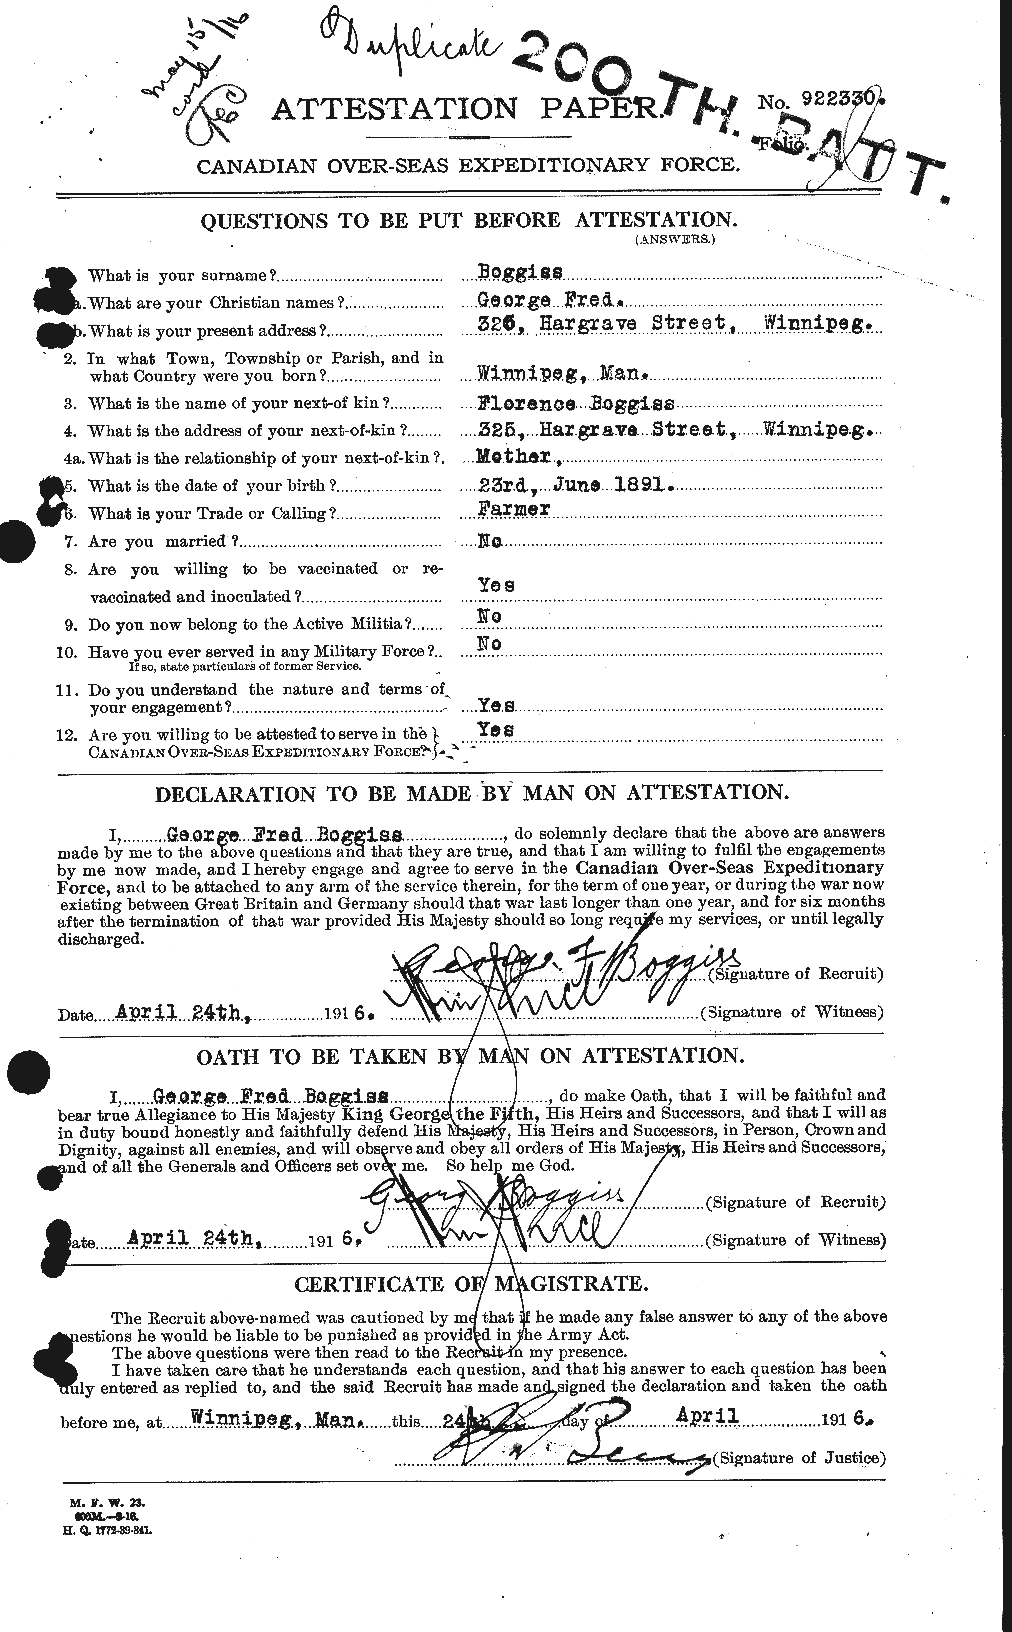 Personnel Records of the First World War - CEF 249243a